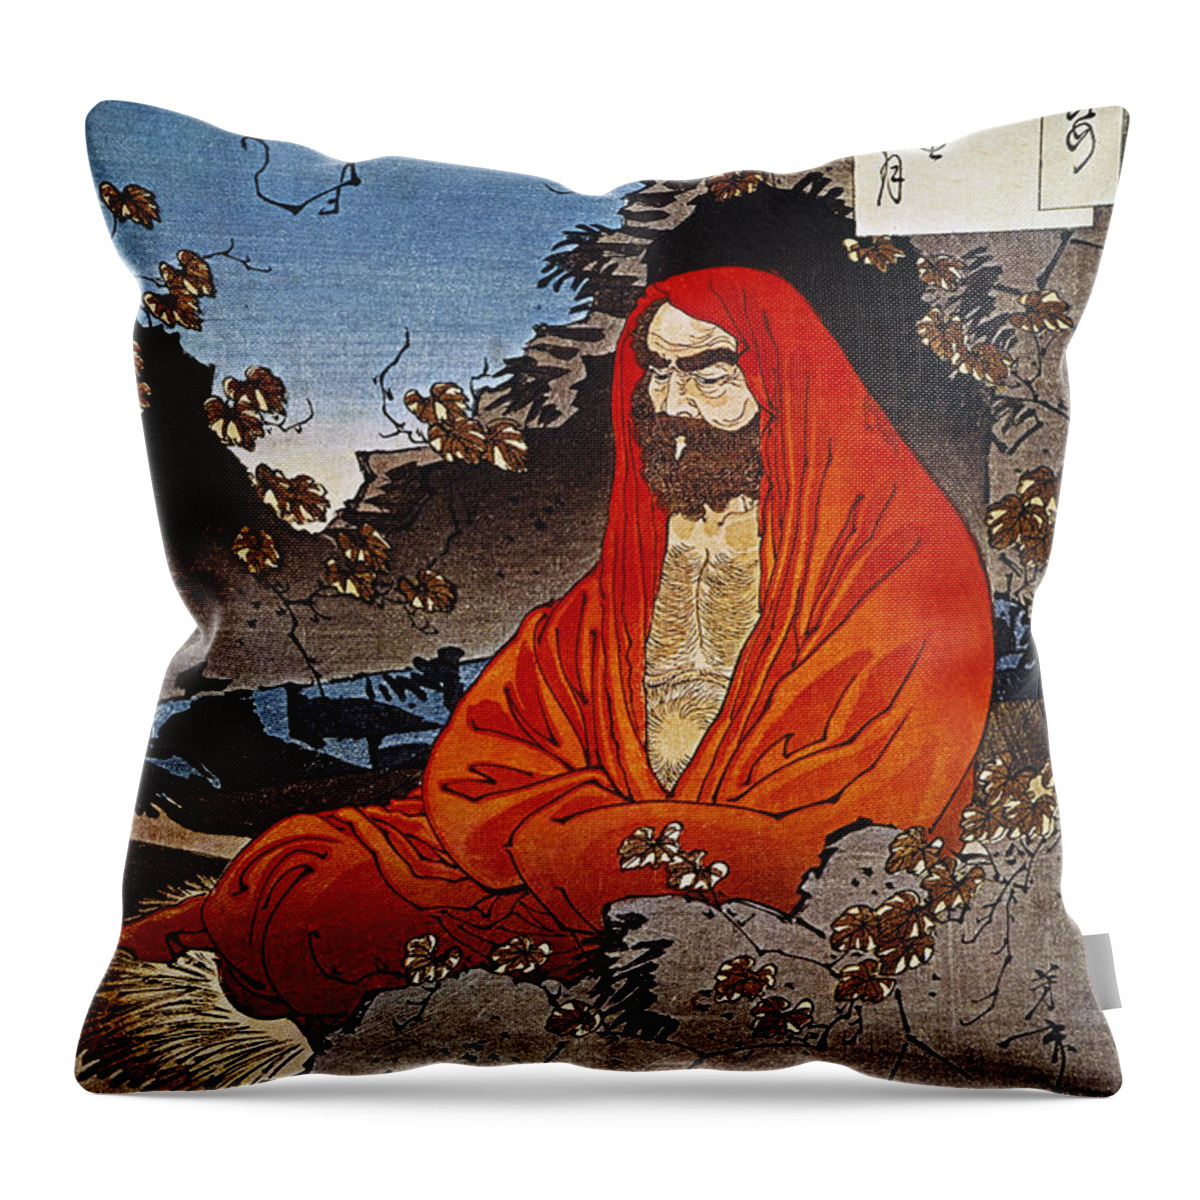 1887 Throw Pillow featuring the photograph Yoshitoshi: Holy Man by Granger